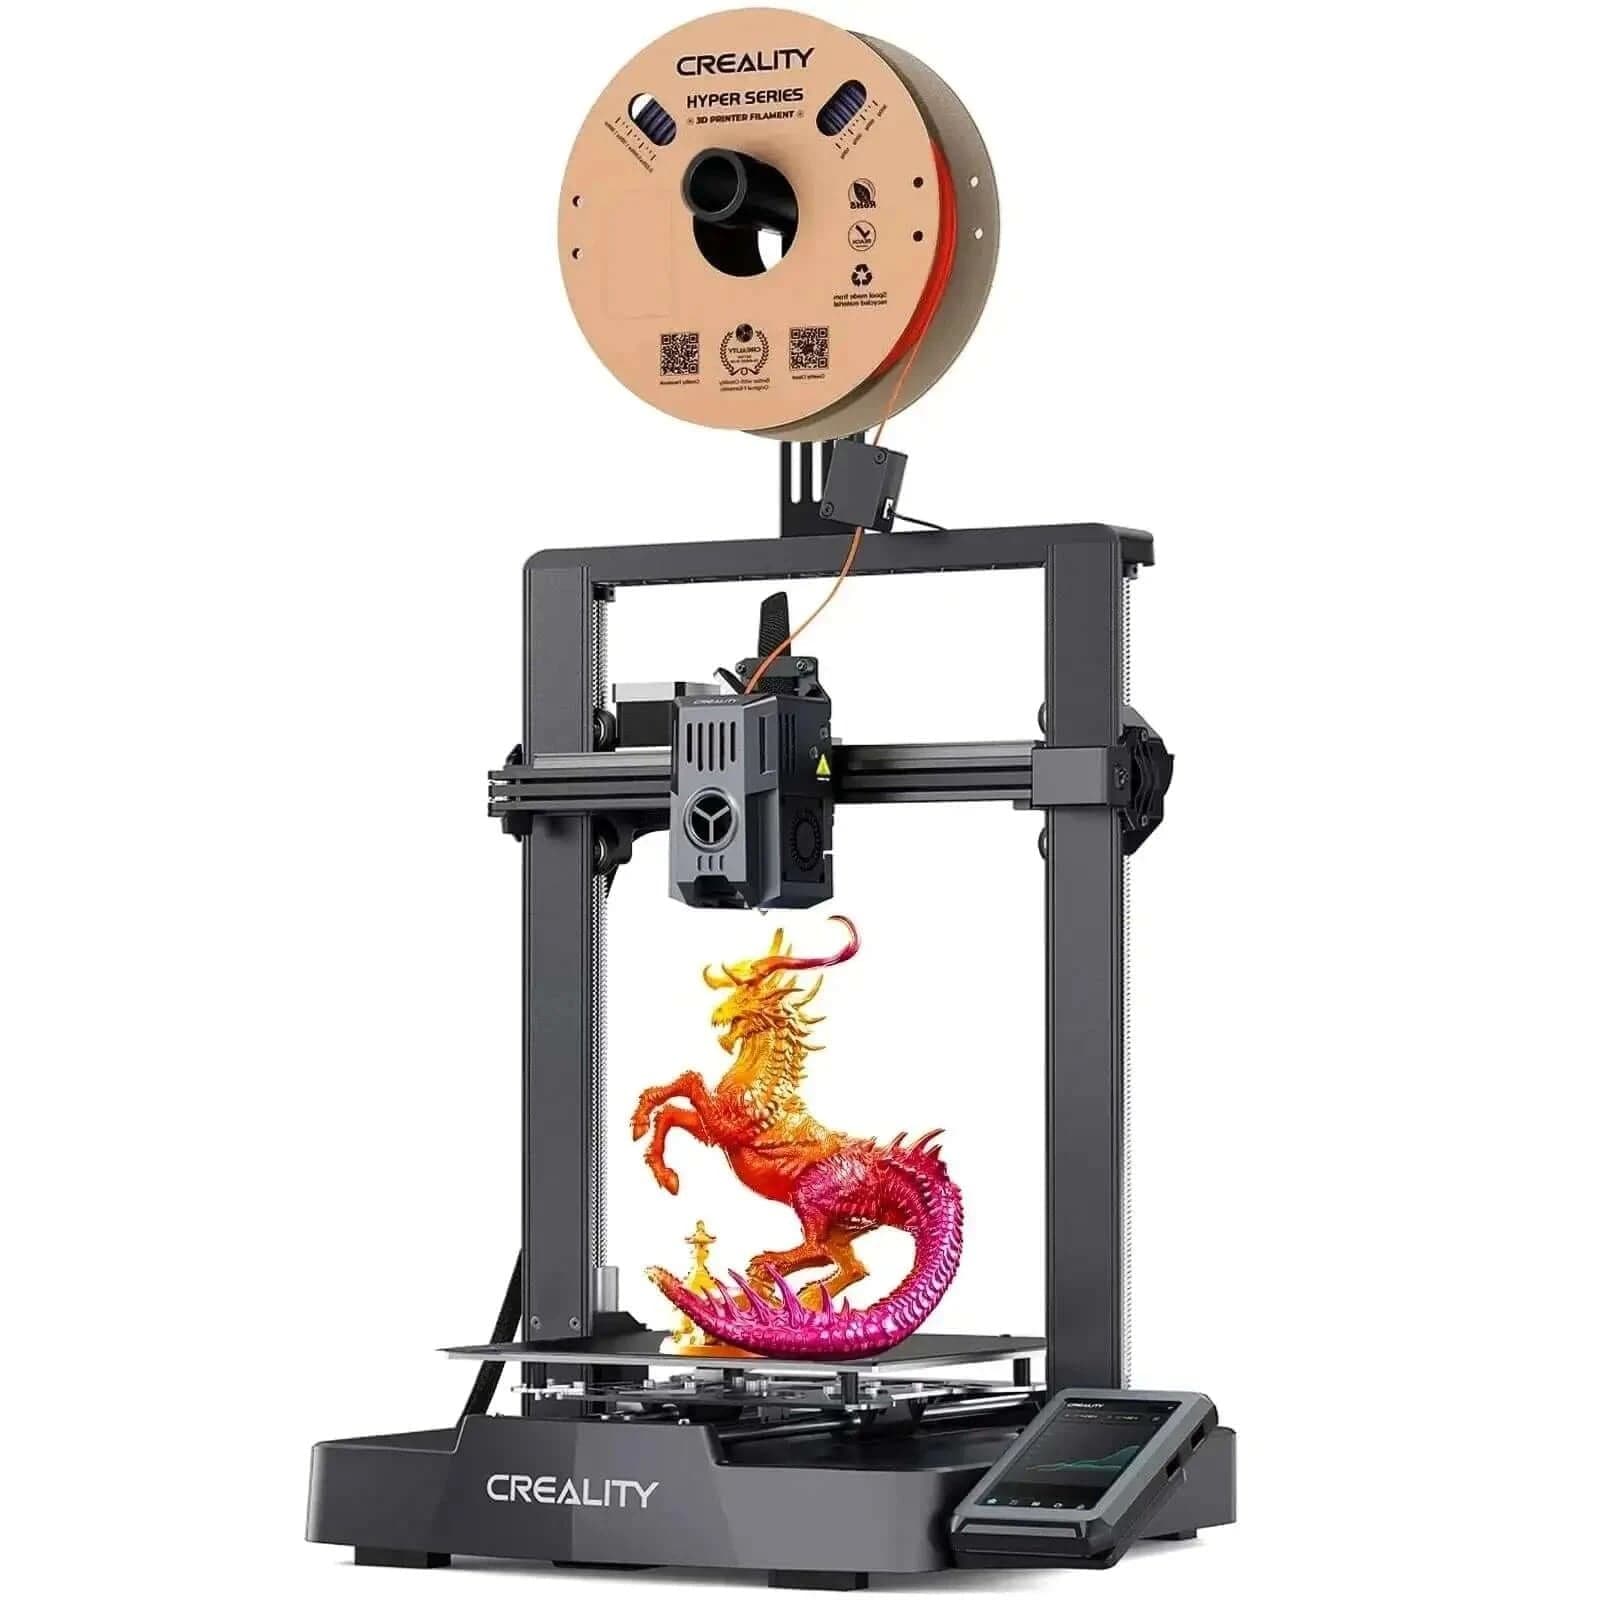 Creality Ender 3 V3 KE+10kg Ender-PLA+ Filament 1.75mm 1kg/Spool Features:

【Printer and Filament Combo】This Combo Includes: Ender-3 V3 KE Printer*1, 10*1kg PLA+ Filament(5*White, 5*Black).
【Ship From Amazon FBA Warehouse】Same shCreality Ender 3 V3 KE+10kg Ender-PLA+ Filament 13D Printer